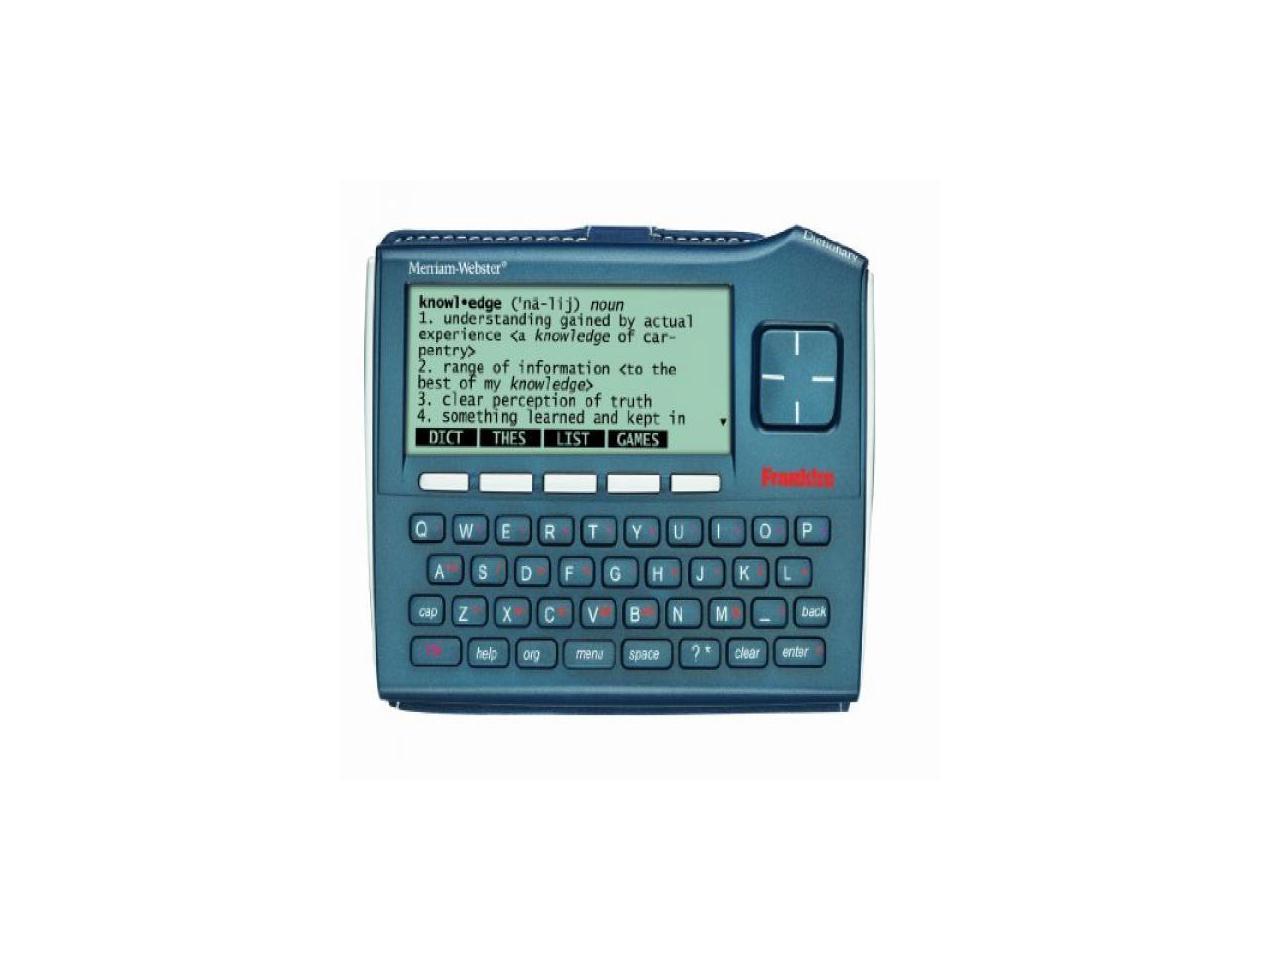 Franklin Electronics MWD-1510 Merriam-Webster Advanced Dictionary and Thesaurus with 5 Language Translator 